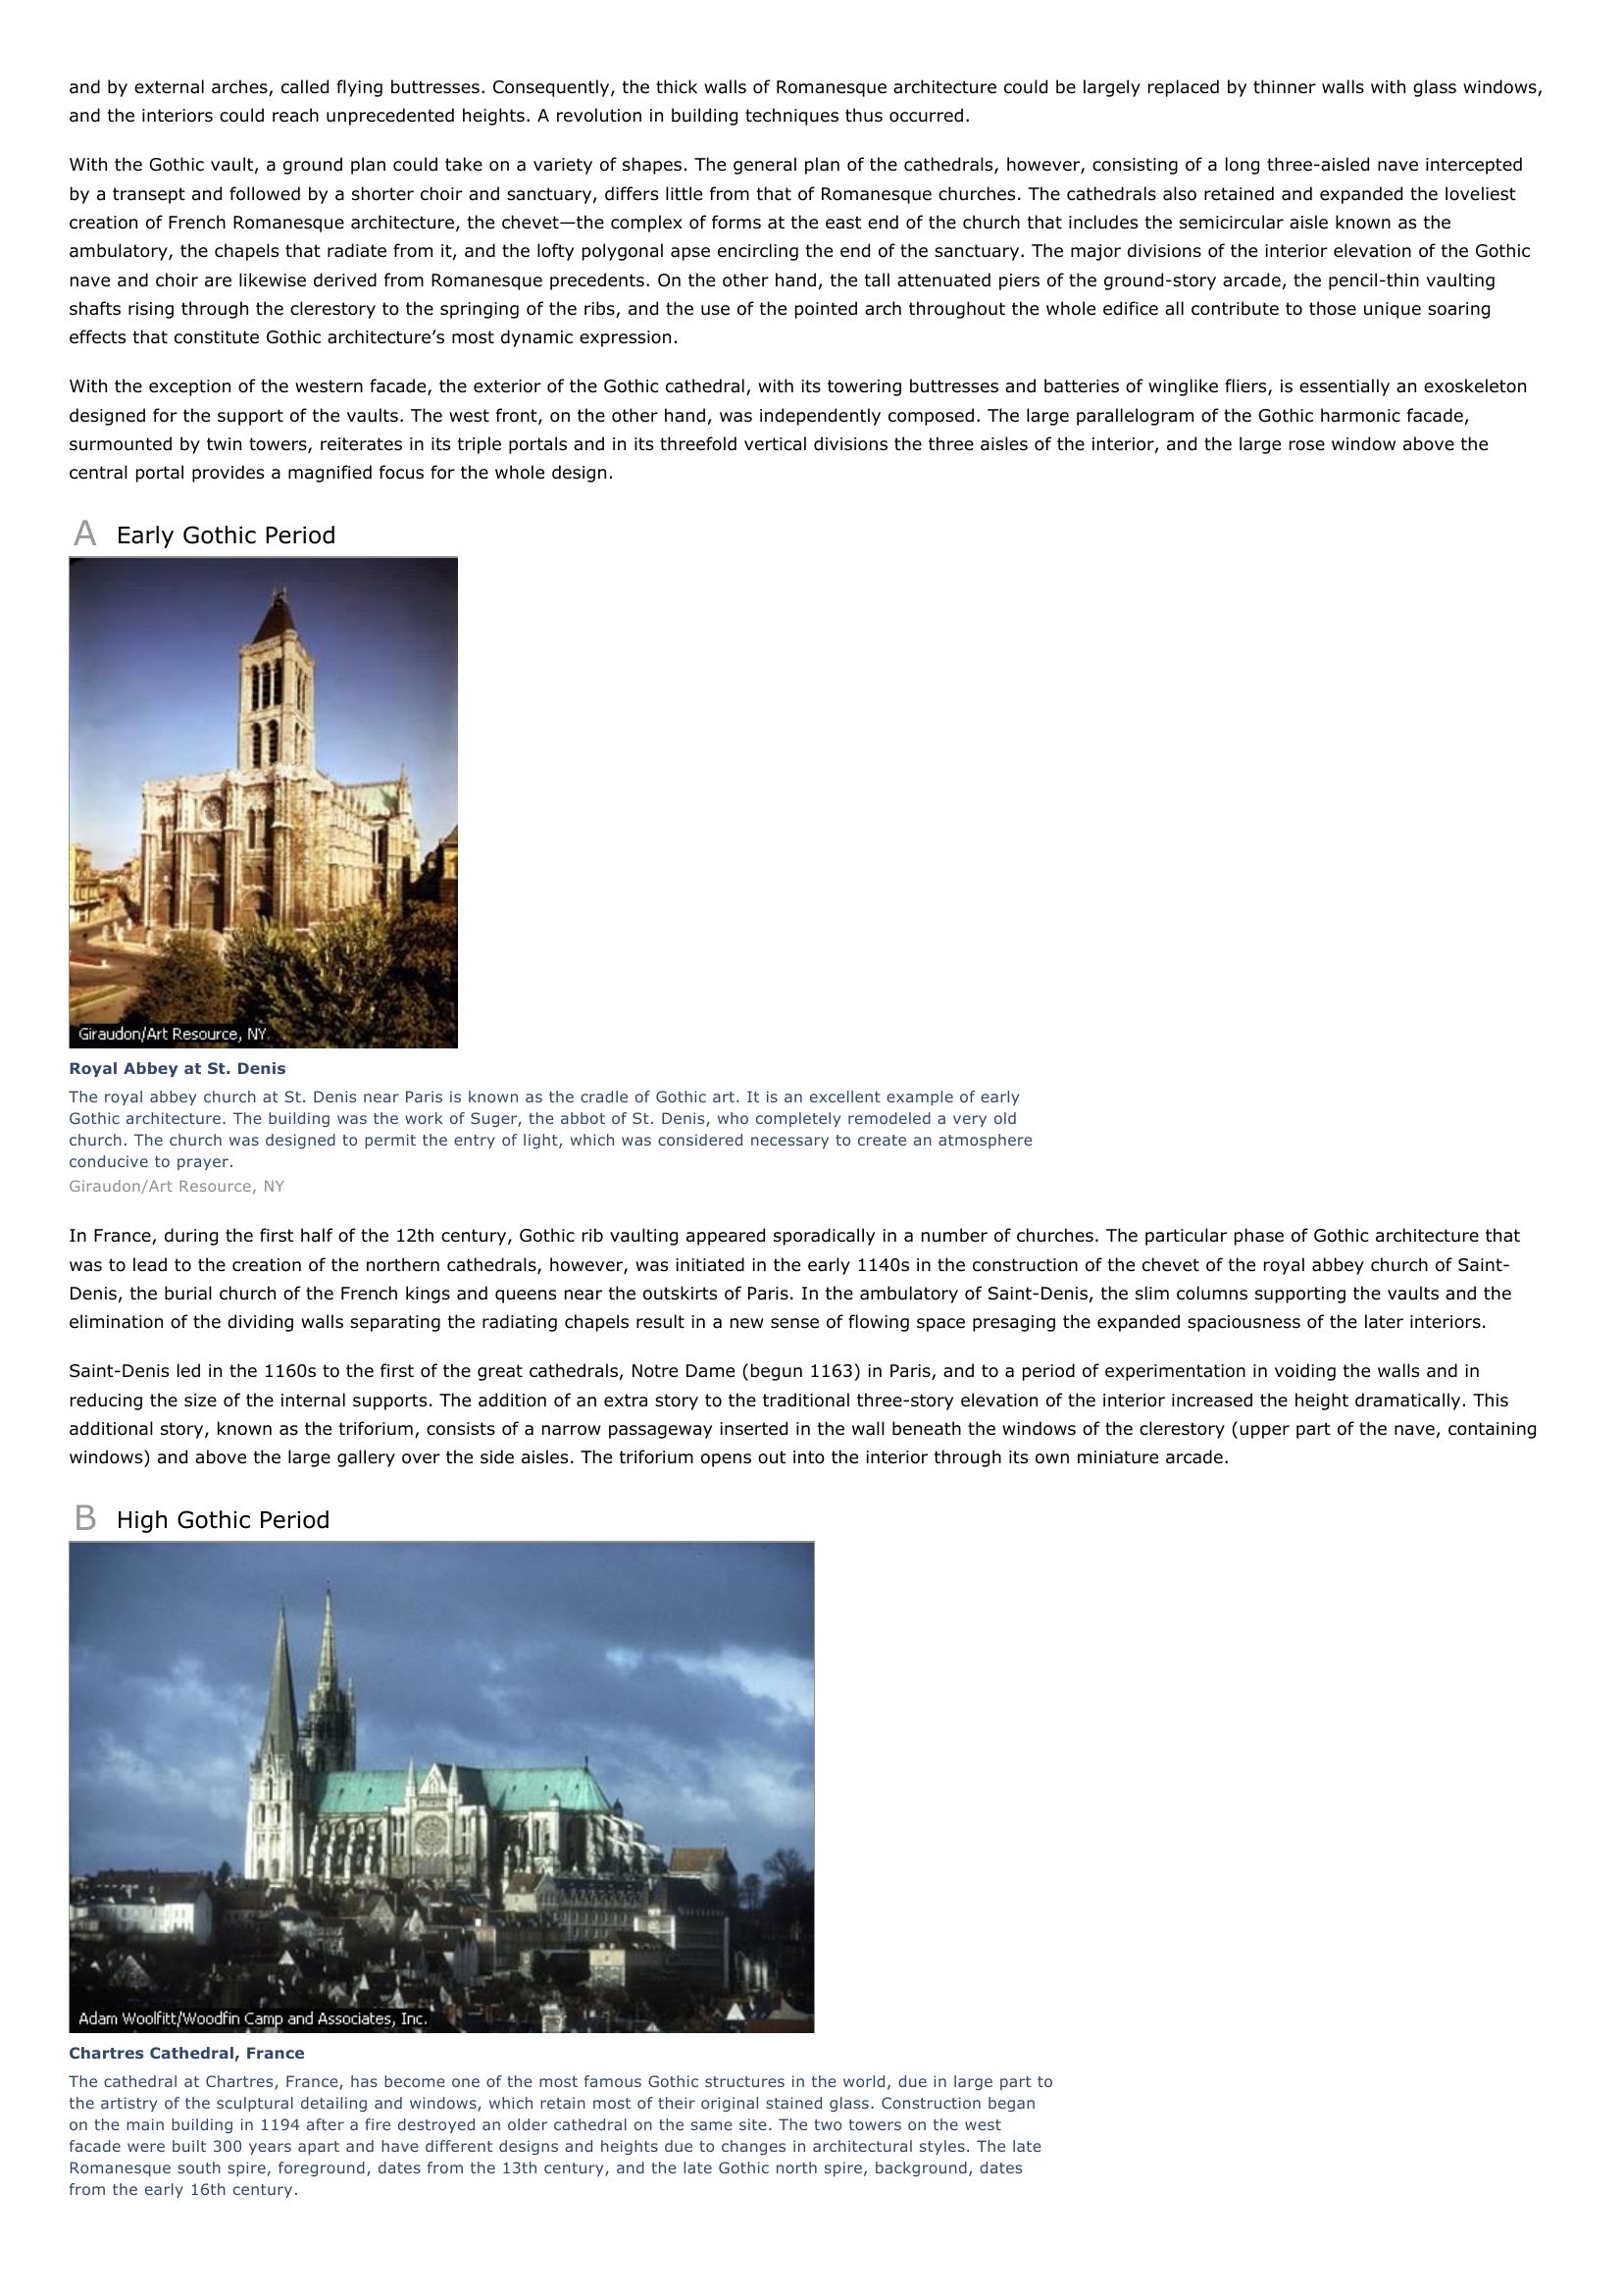 Prévisualisation du document Gothic Art and Architecture
I

INTRODUCTION

Notre Dame Cathedral, Paris
Notre Dame Cathedral, in Paris, was begun in 1163 and completed for the most part in 1250.